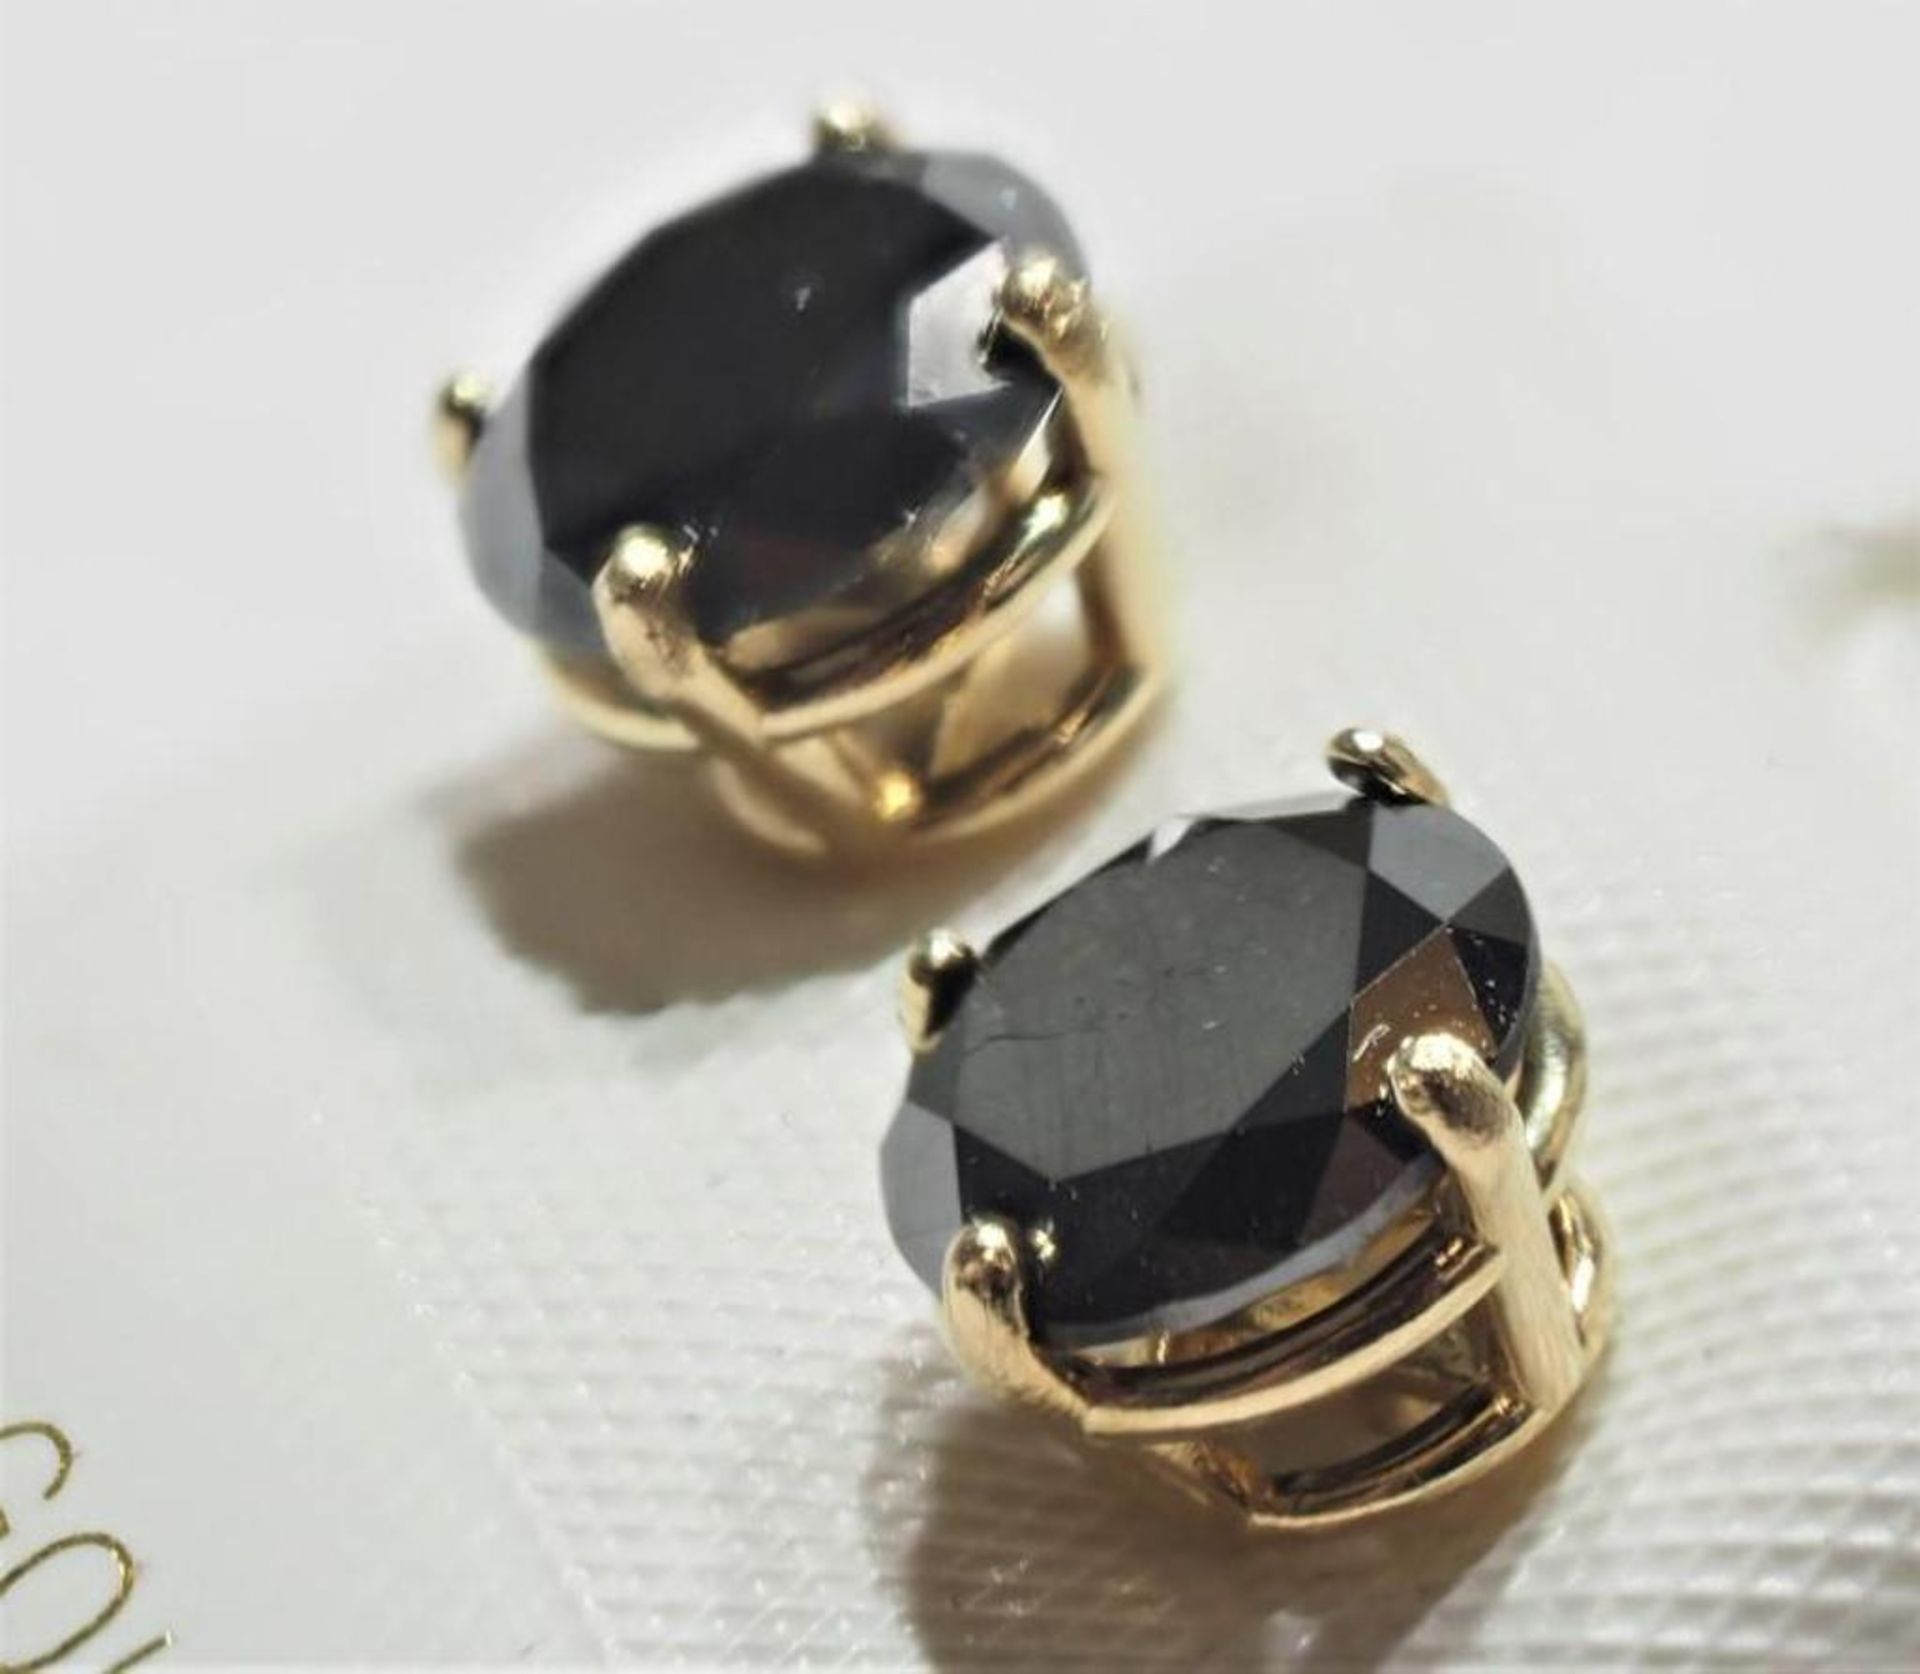 14K Yellow Gold Large Black Diamond (2.65ct) Stud Earrings (Made in Canada). Insurance Value $1600 - Image 2 of 3